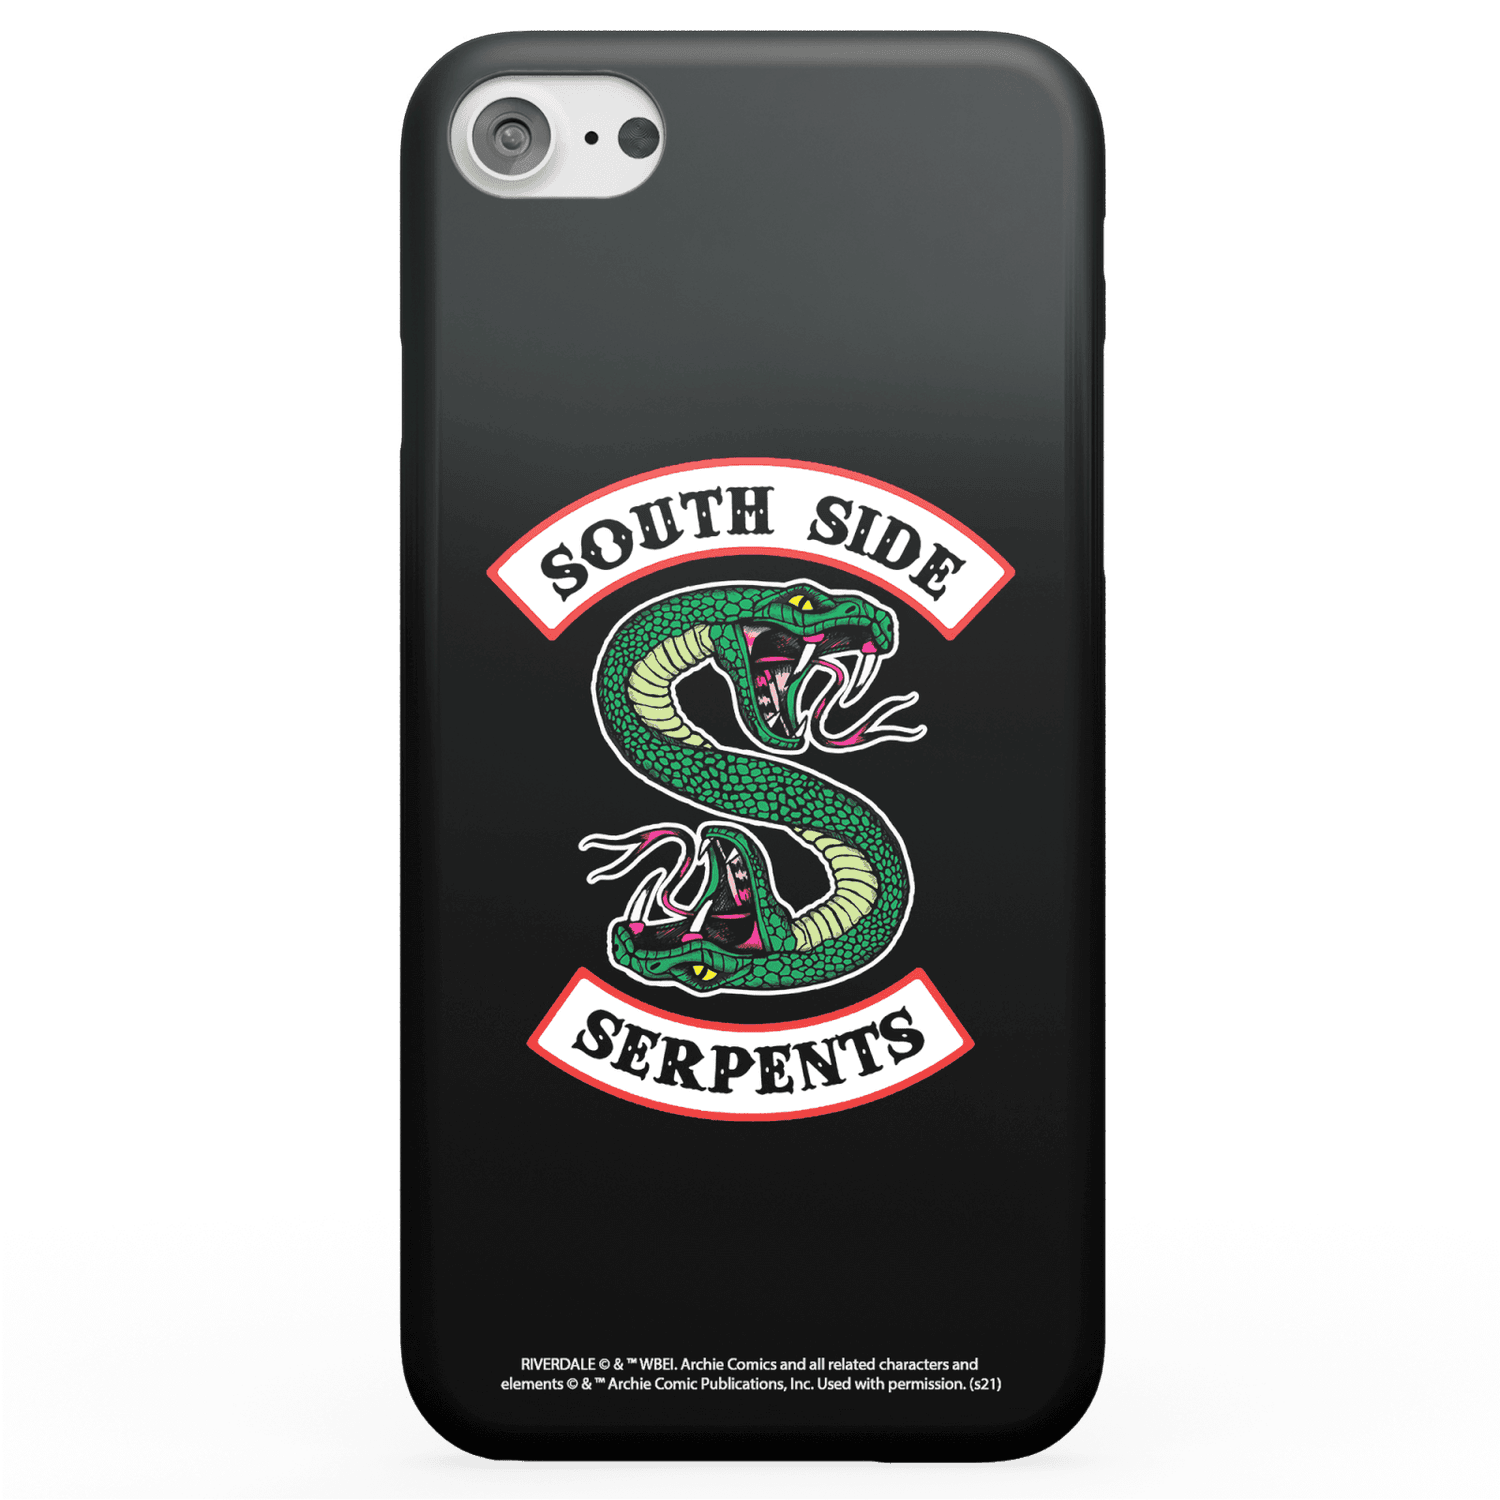 Riverdale South Side Serpent Coque Smartphone pour iPhone et Android